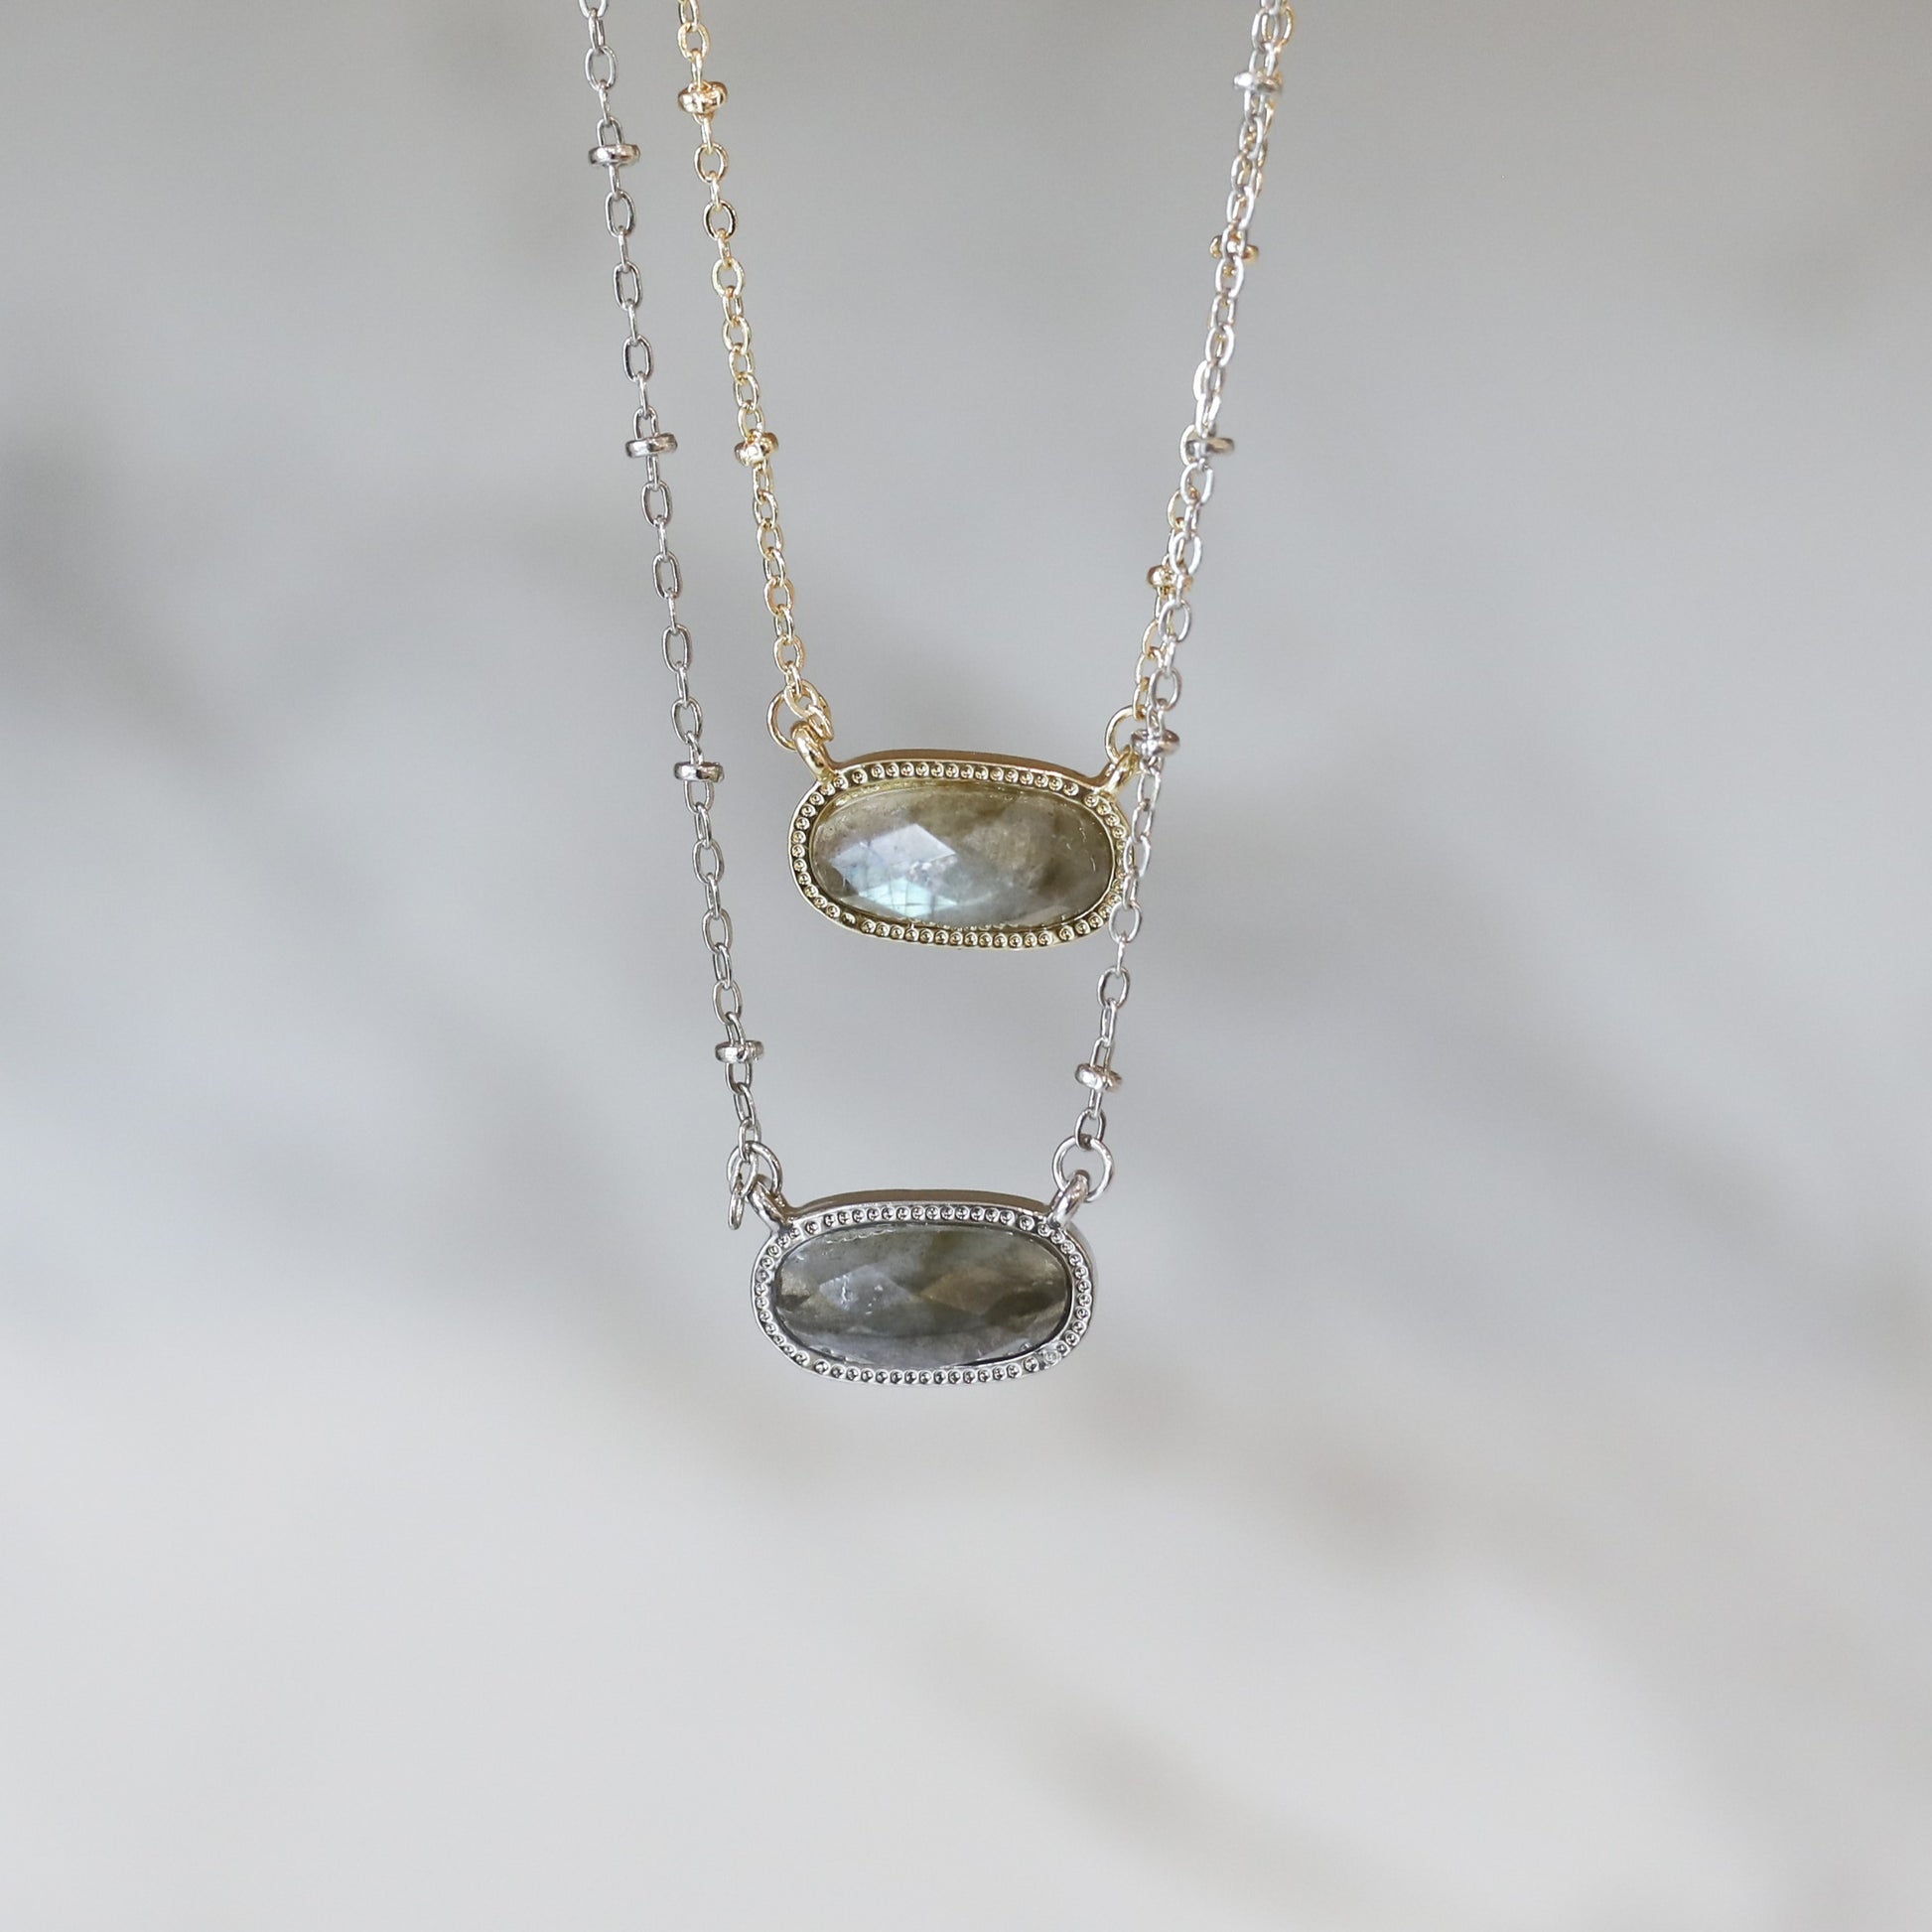 Meaningful Gemstone Necklace in Labradorite available with a Gold or Silver chain